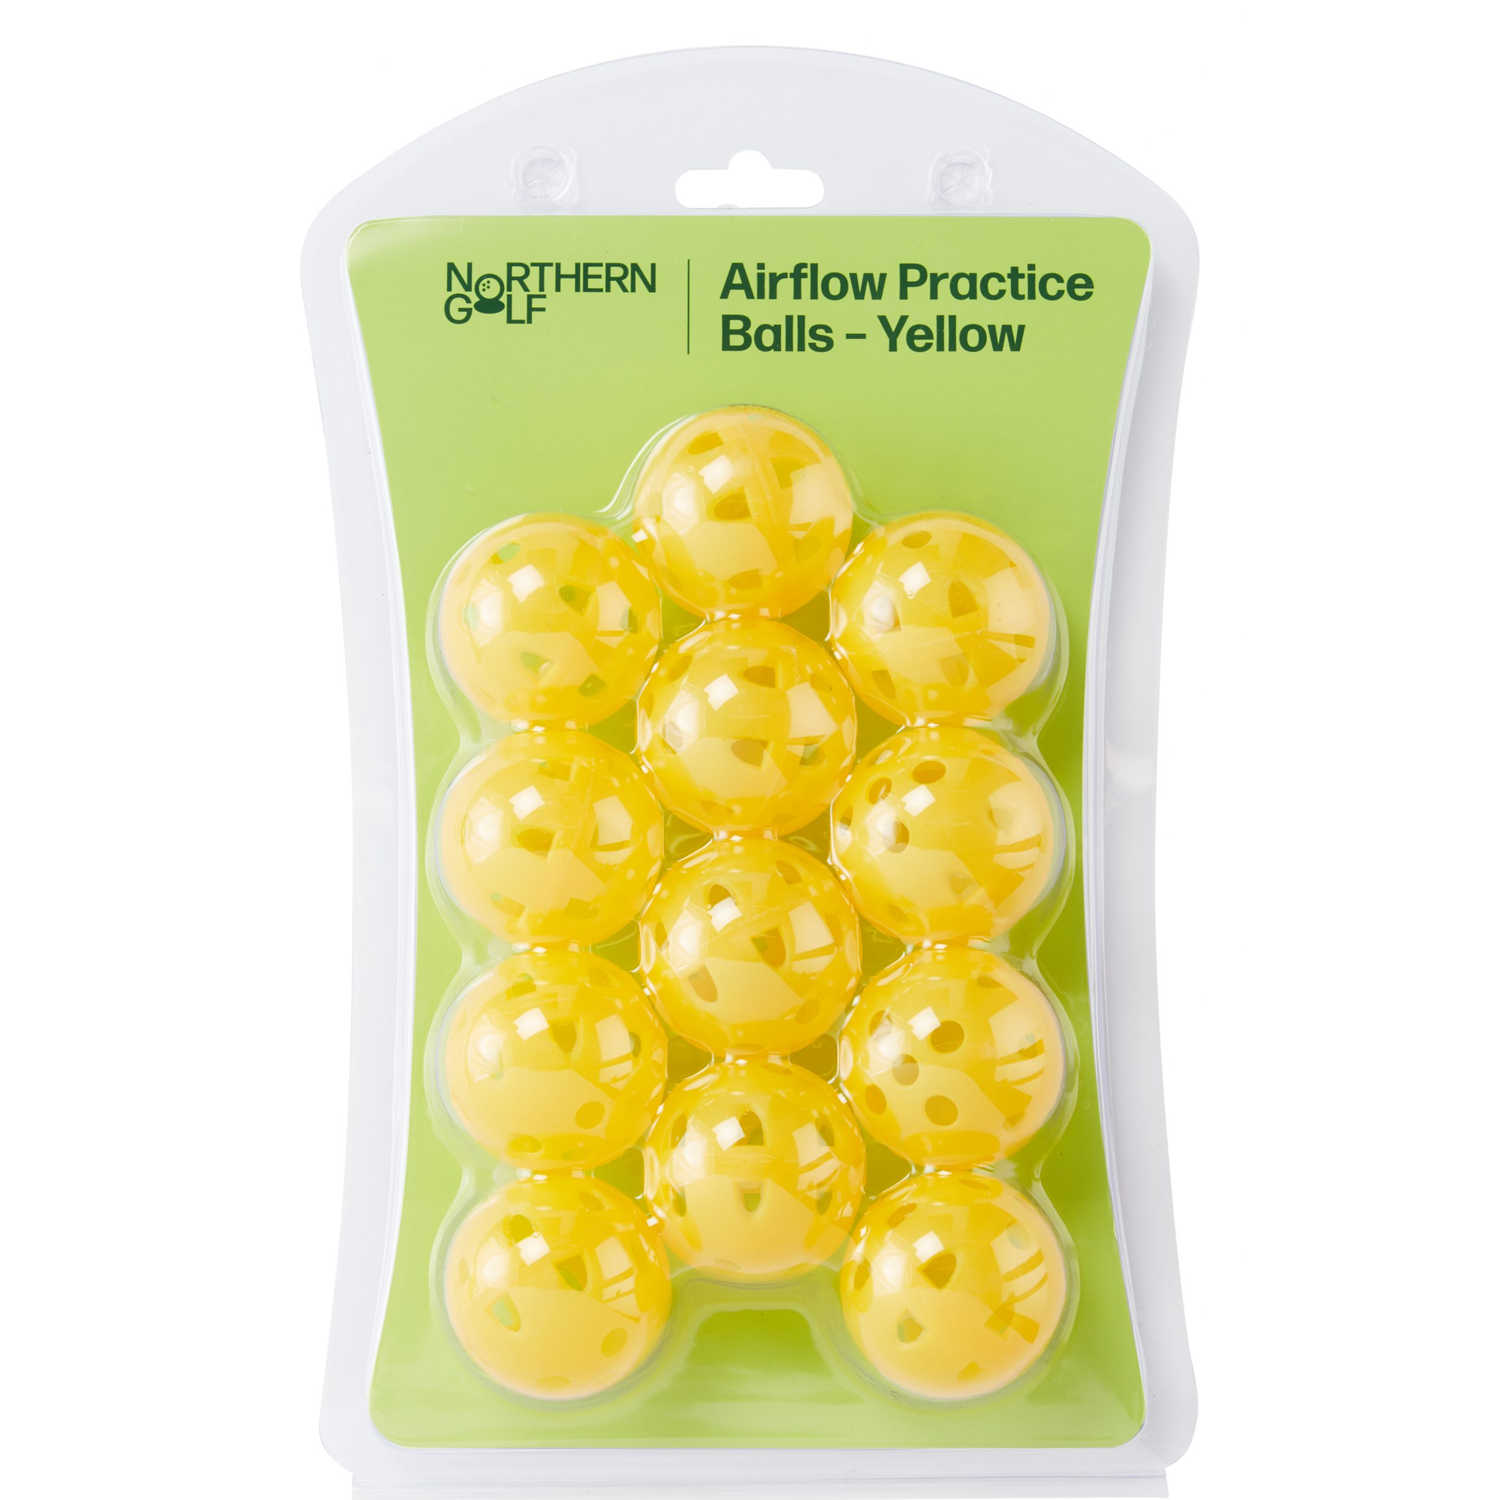 Northern Golf Airflow Practice Golf Balls Yellow Pack of 12